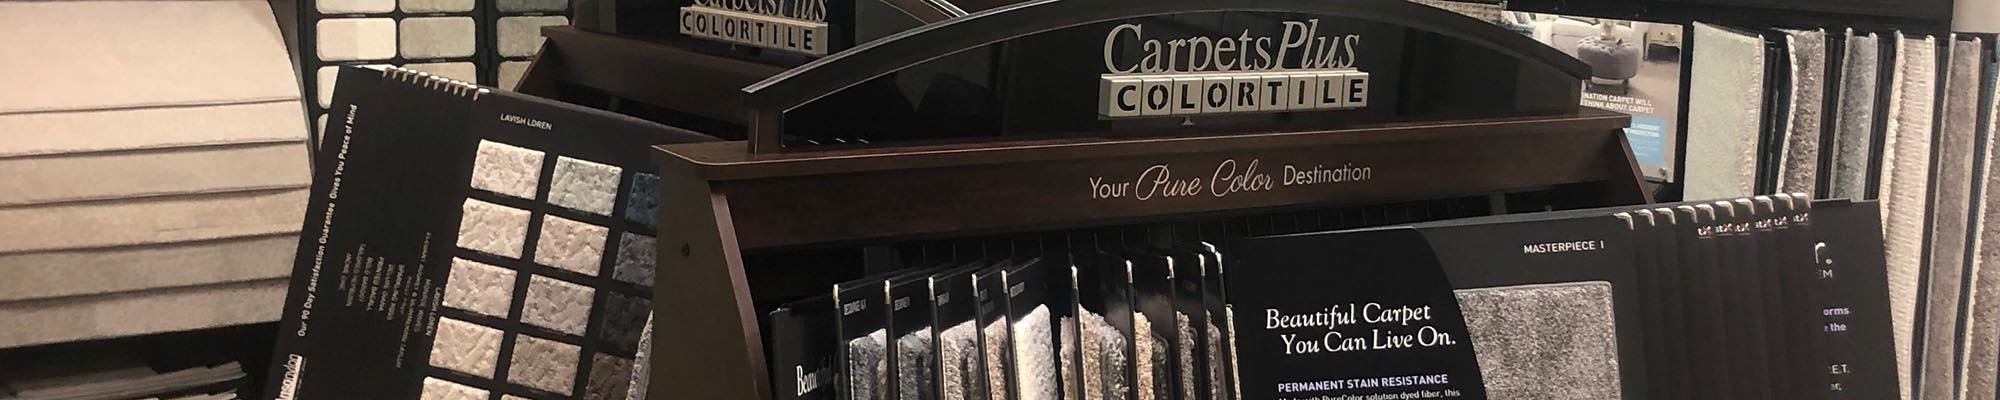 Local Flooring Retailer in Port Charlotte, FL - COLORTILE CarpetsPlus providing a wide selection of flooring and expert advice.